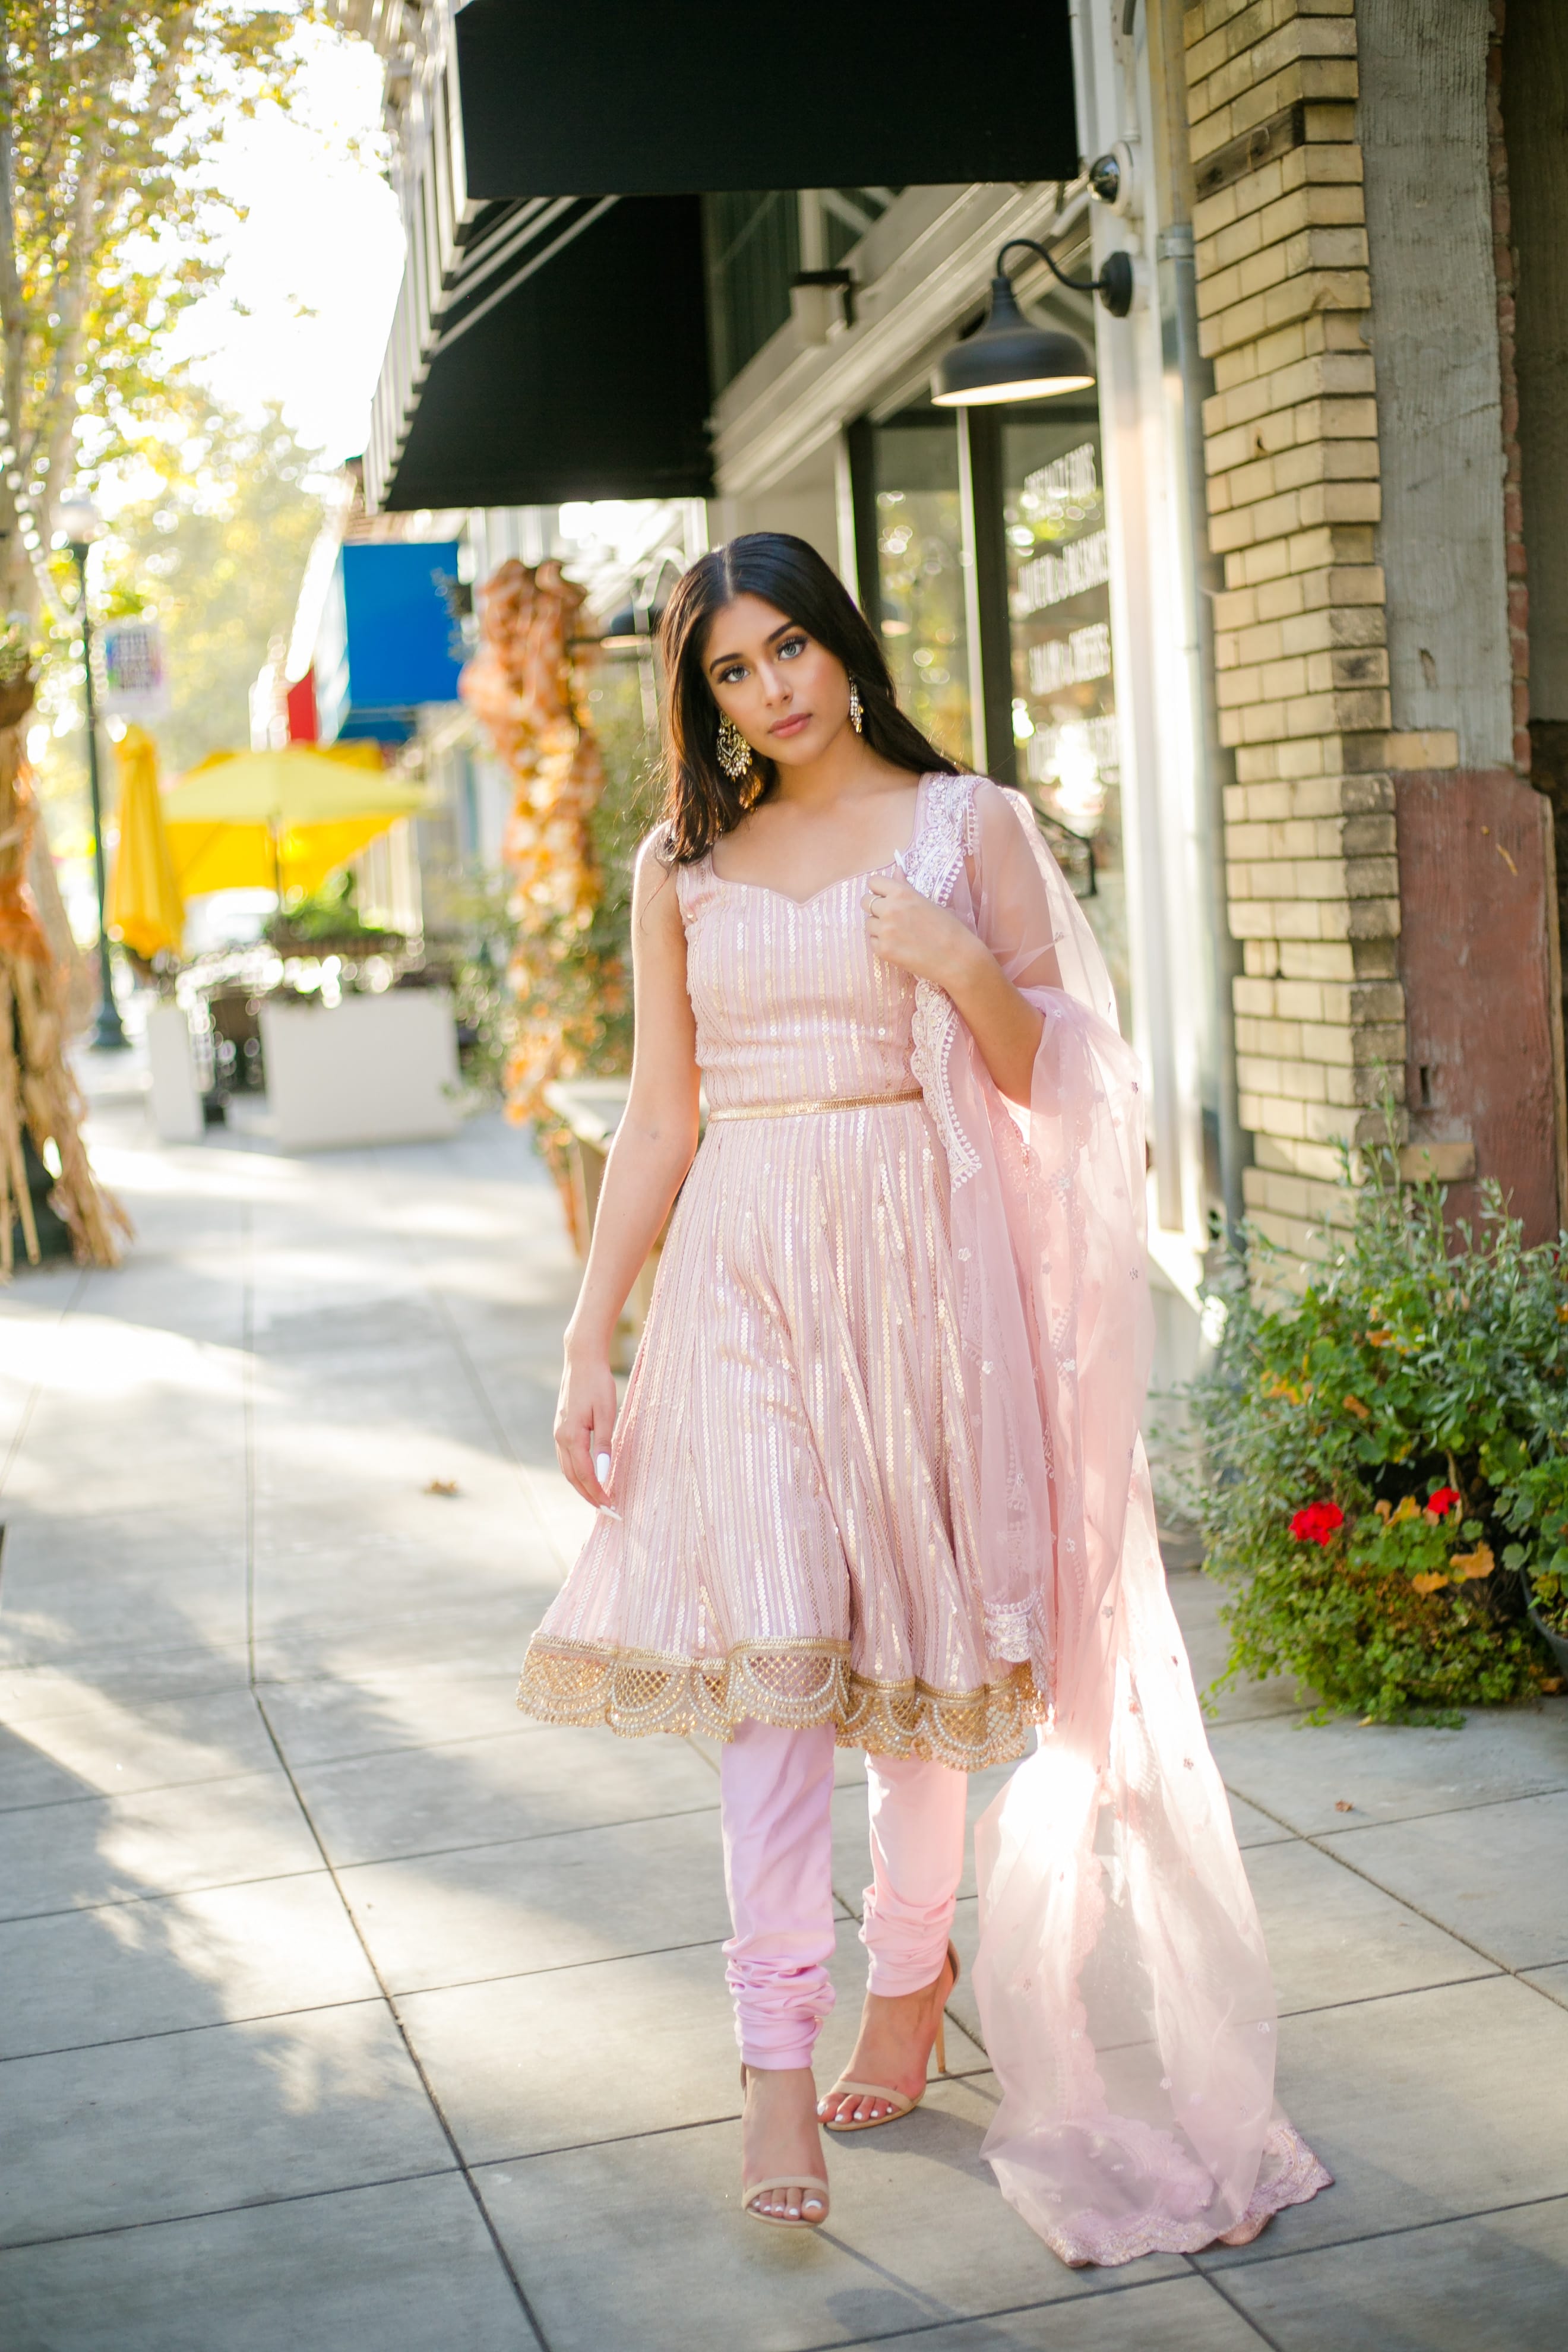 Anarkali Suits For Short Height? – Do's And Dont's